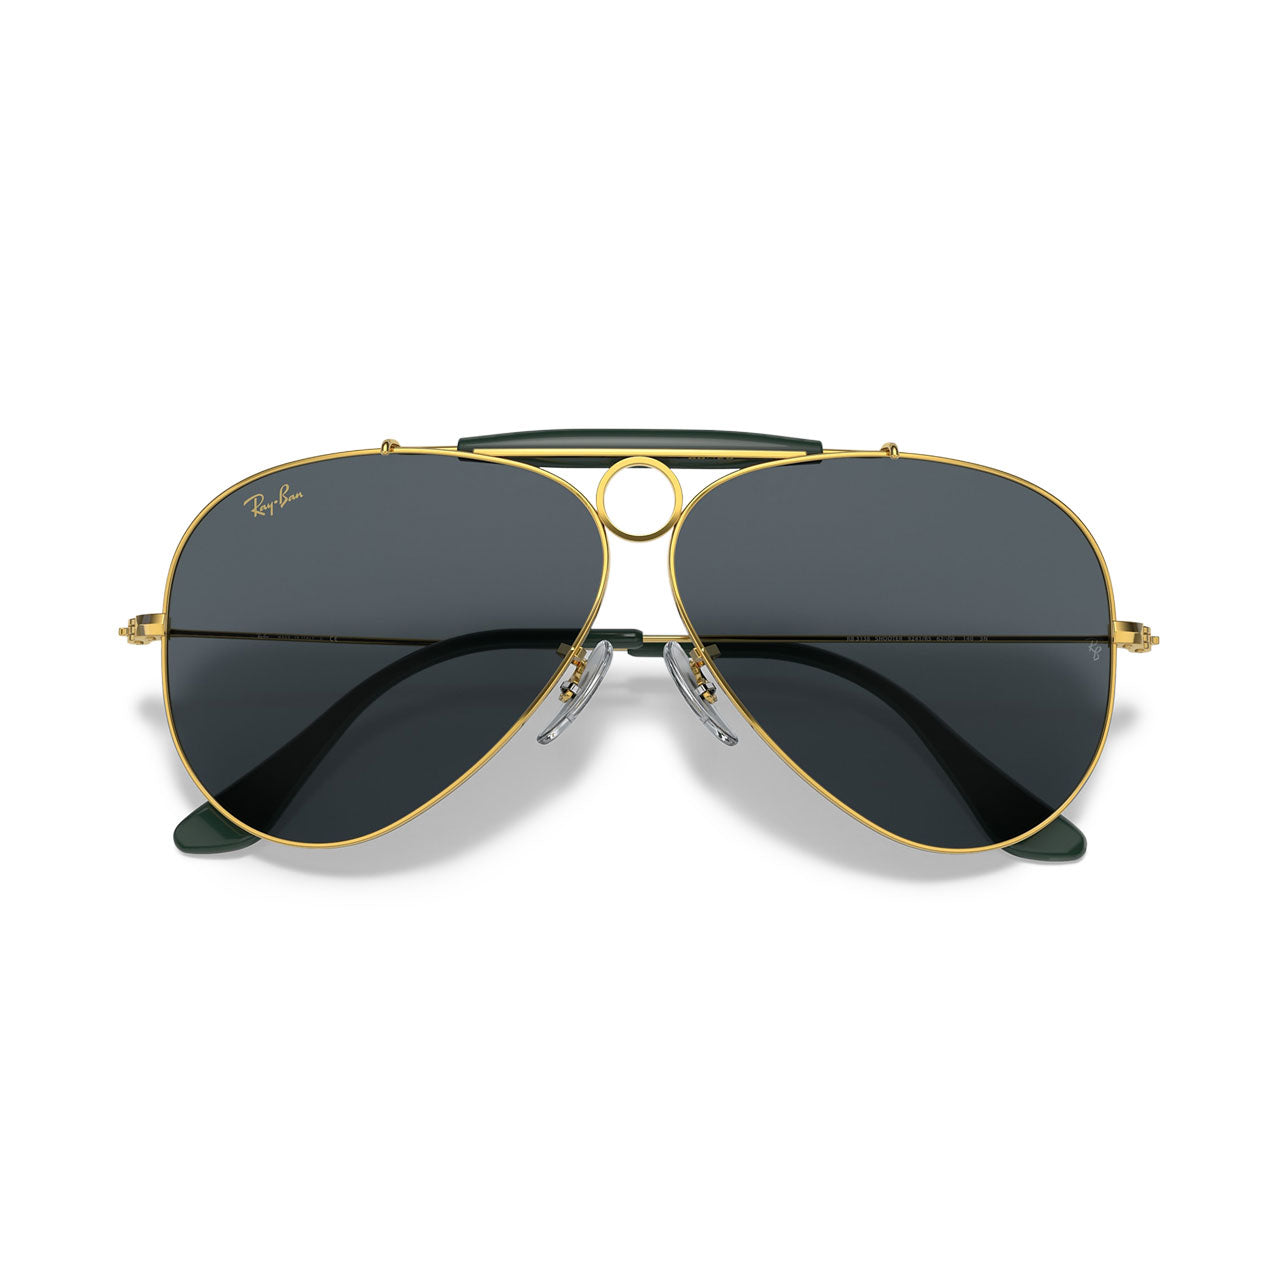 How Ray-Ban's Aviator sunglasses went from military essential to